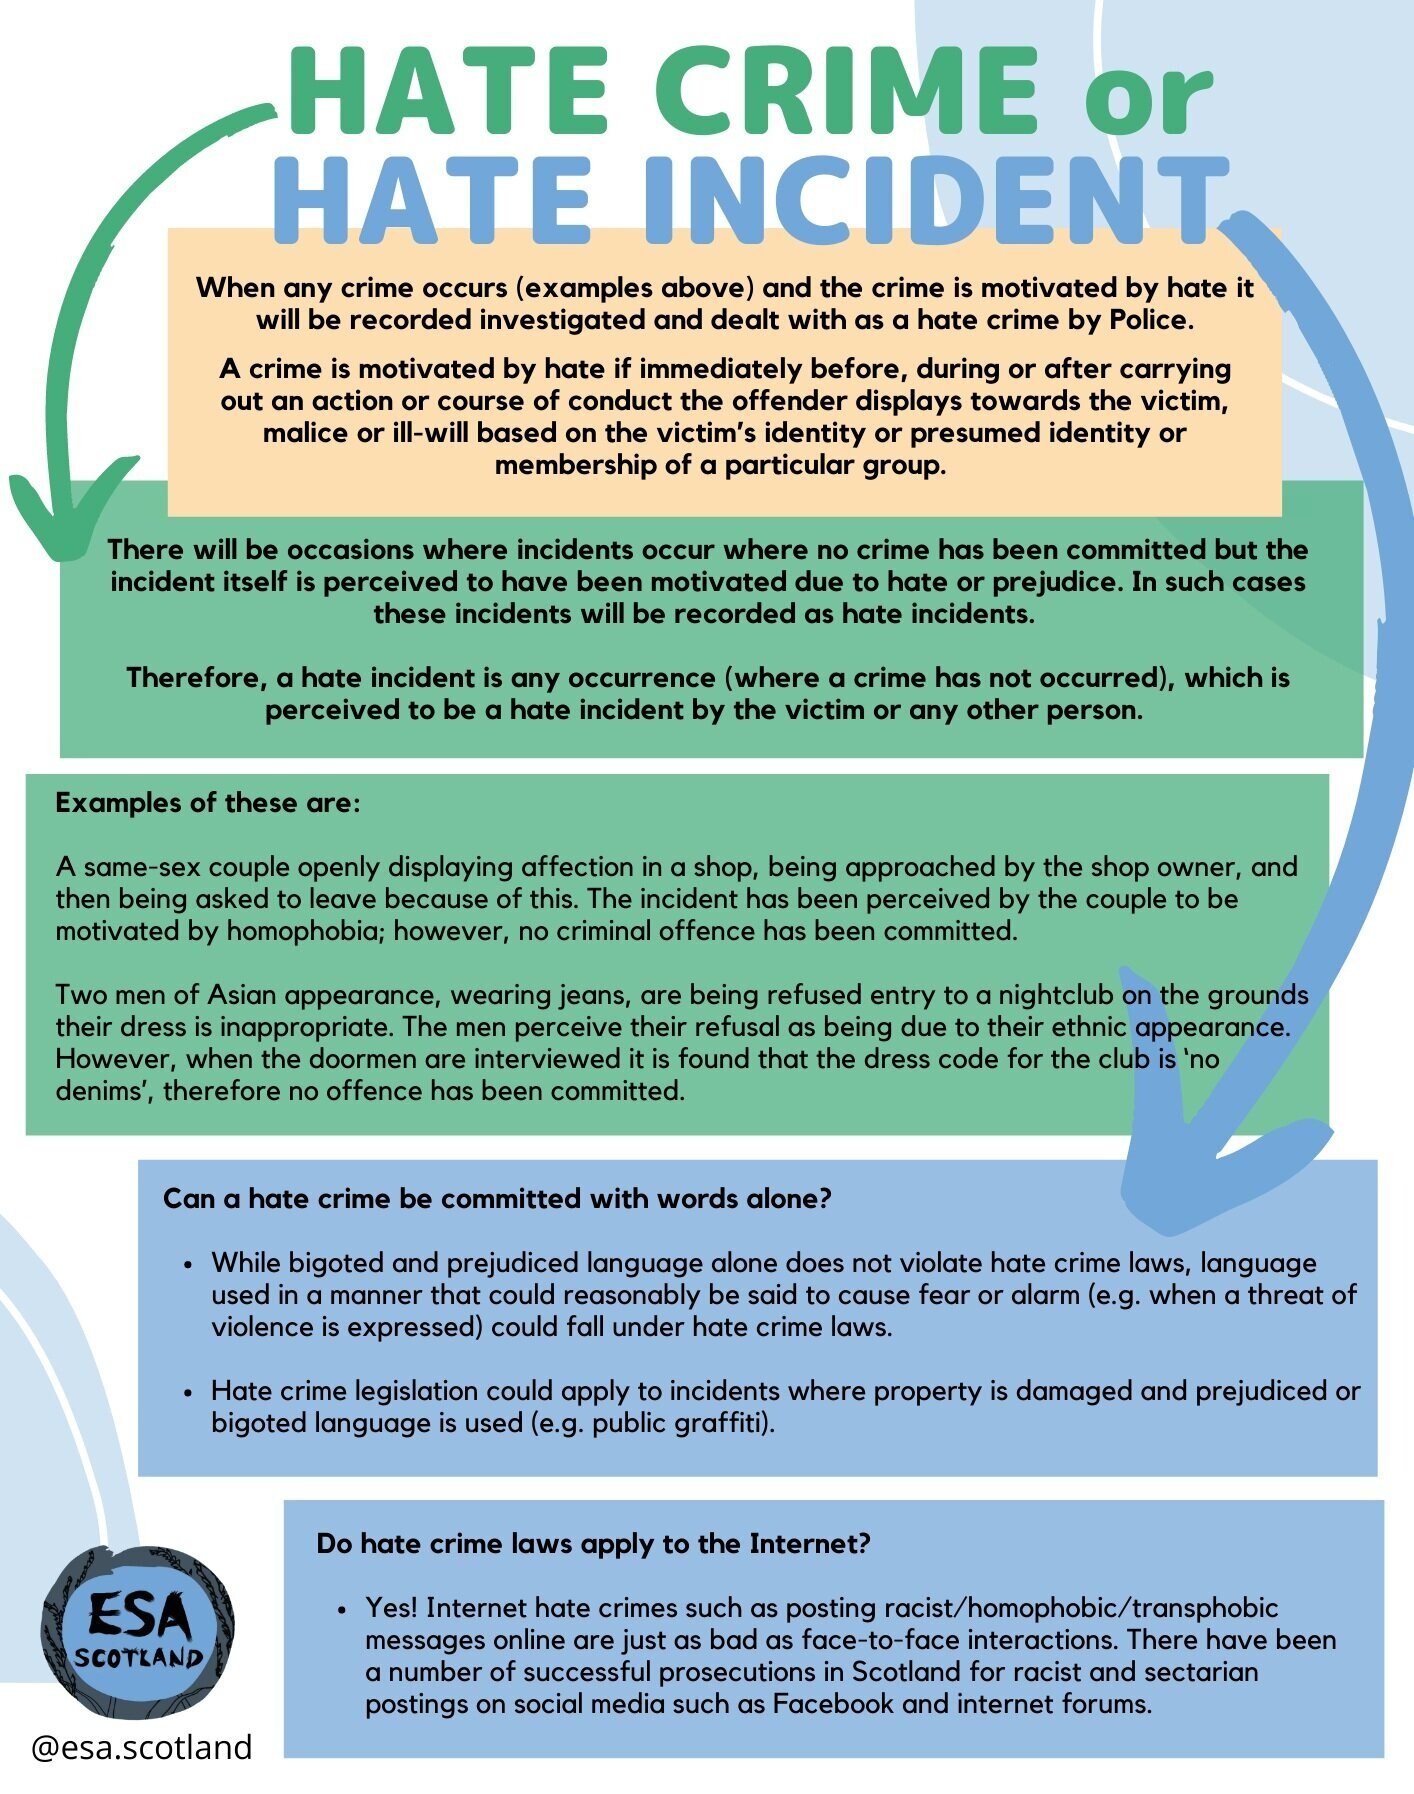 When does bullying become a hate crime? - Hampshire Victim Care